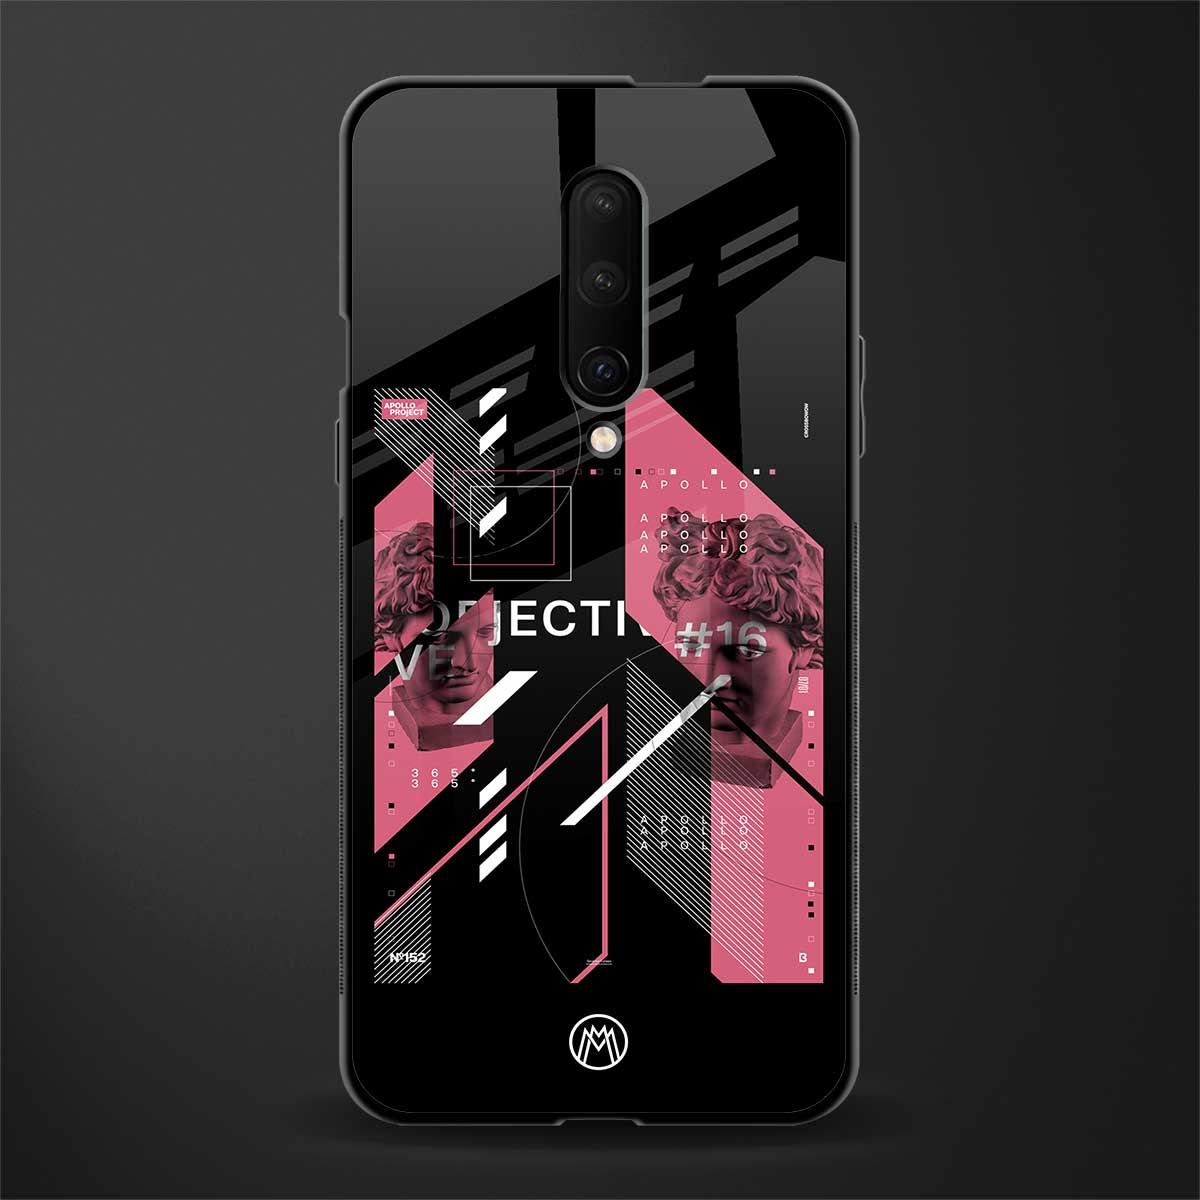 apollo project aesthetic pink and black glass case for oneplus 7 pro image